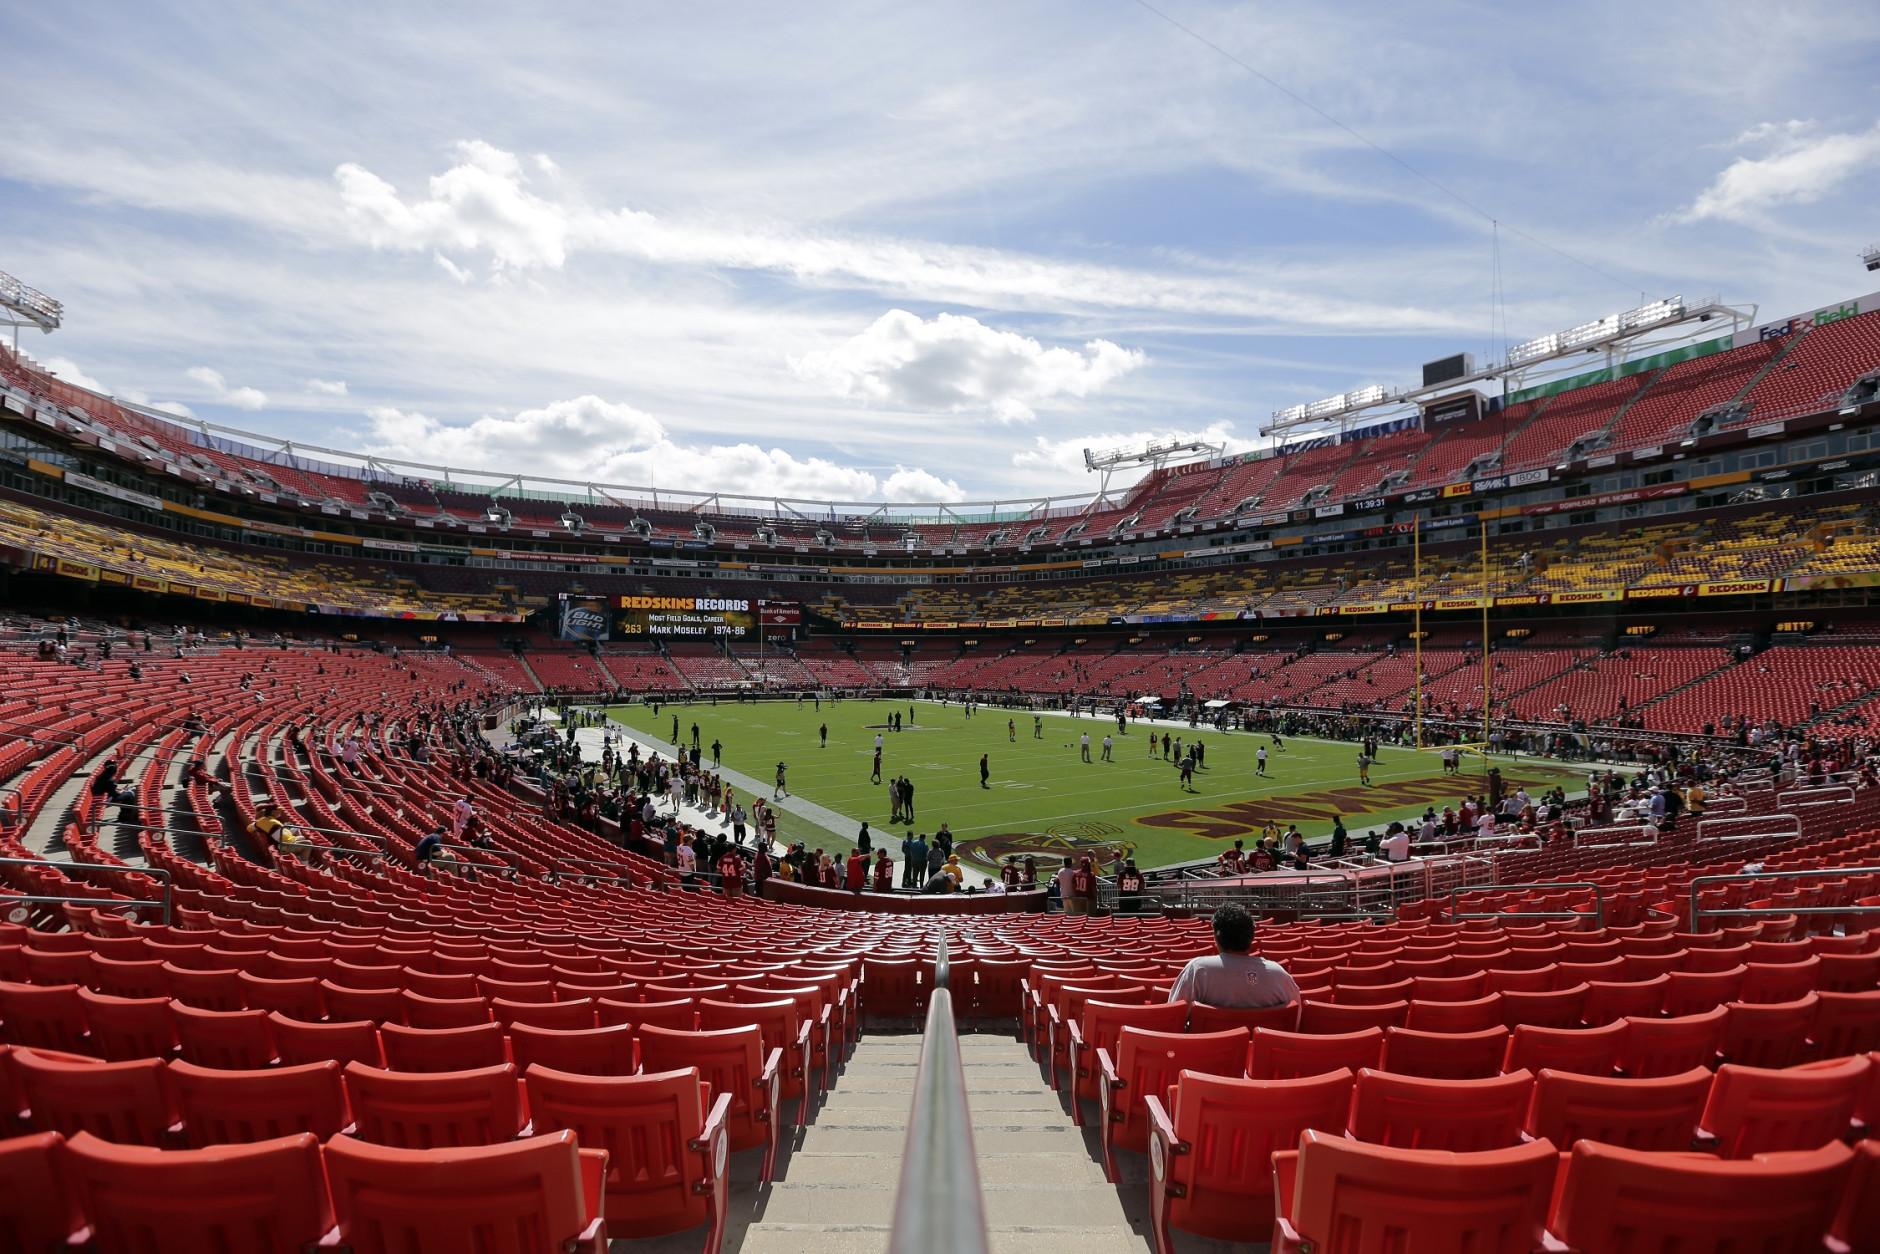 The Redskins will play at FedEx Field through the 2026 season, but talk is already surrounding where they may move to. (Photo: AP/Mark E. Tenally)